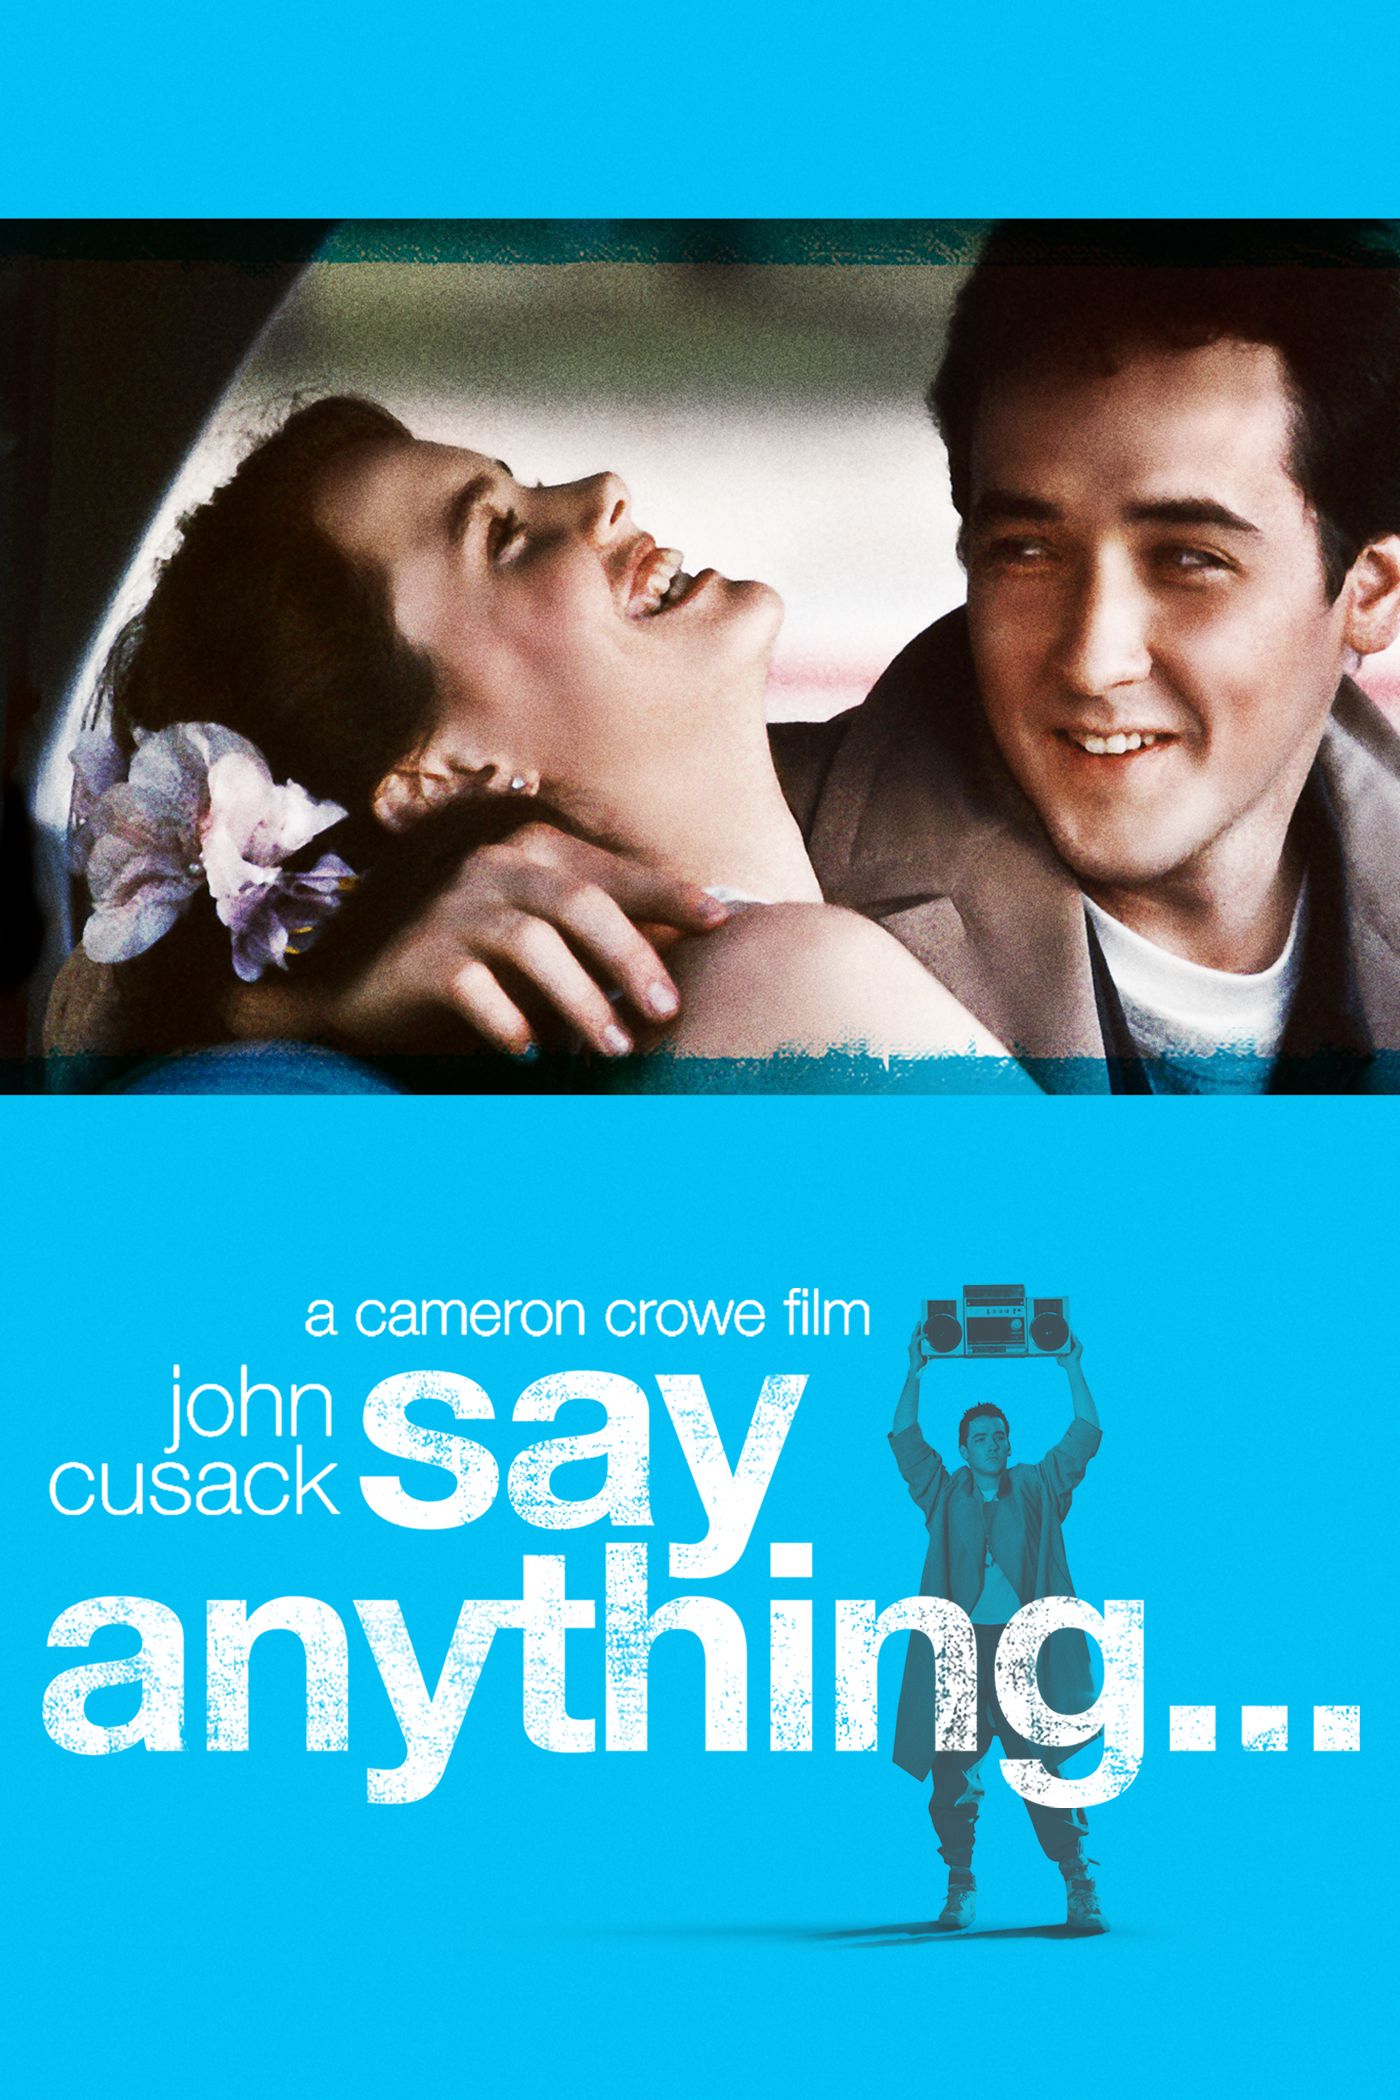 watch love dont cost a thing movie